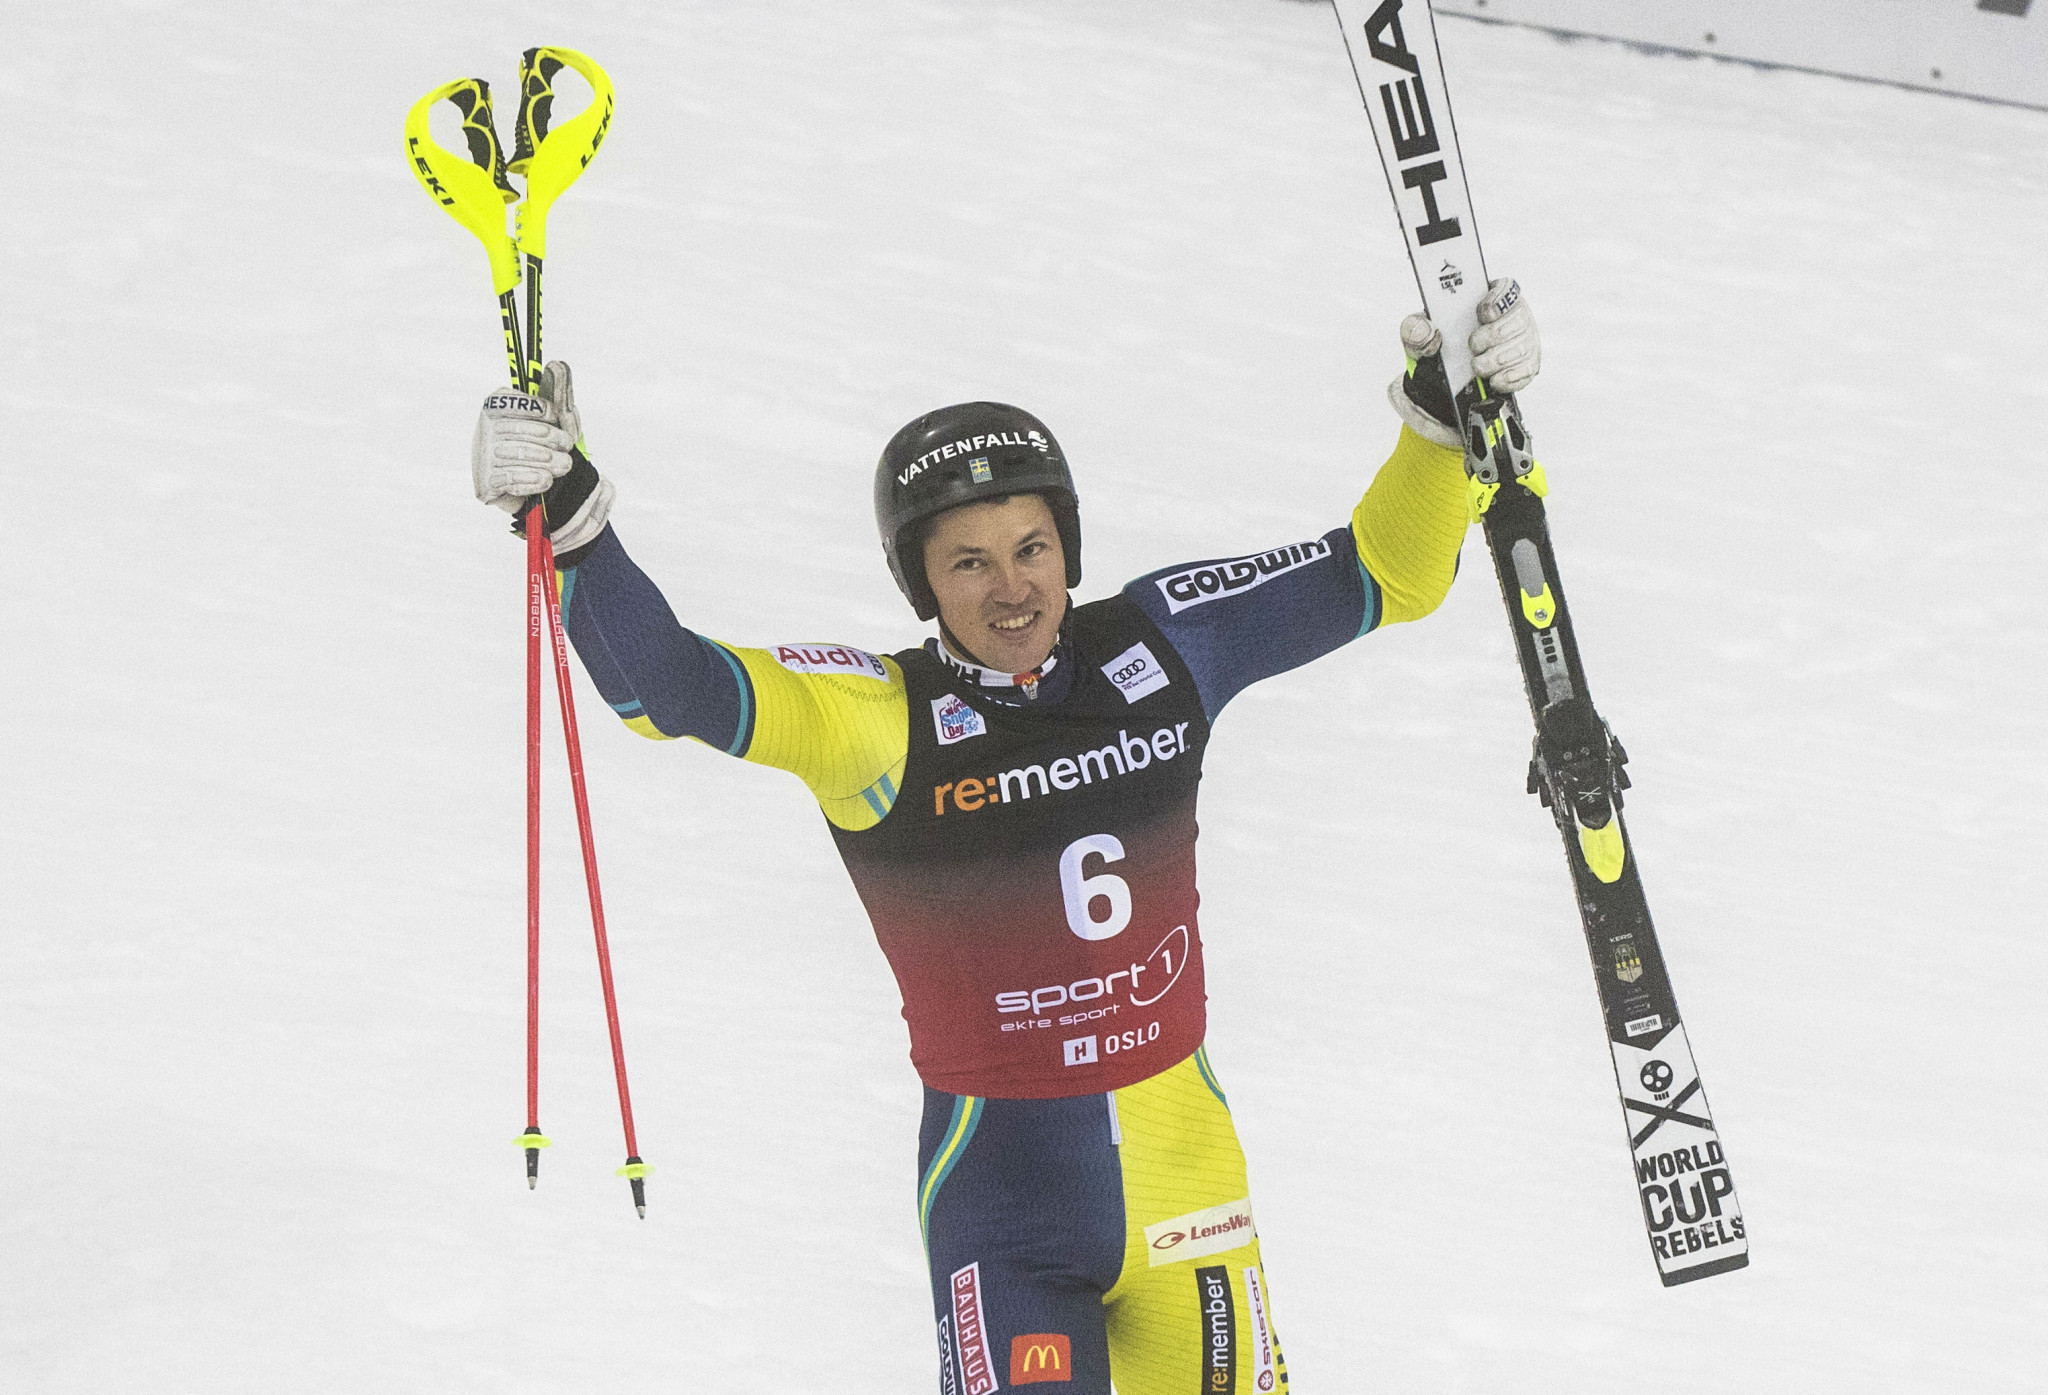 Andre Myhrer won the parallel slalom event in Oslo ©Getty Images